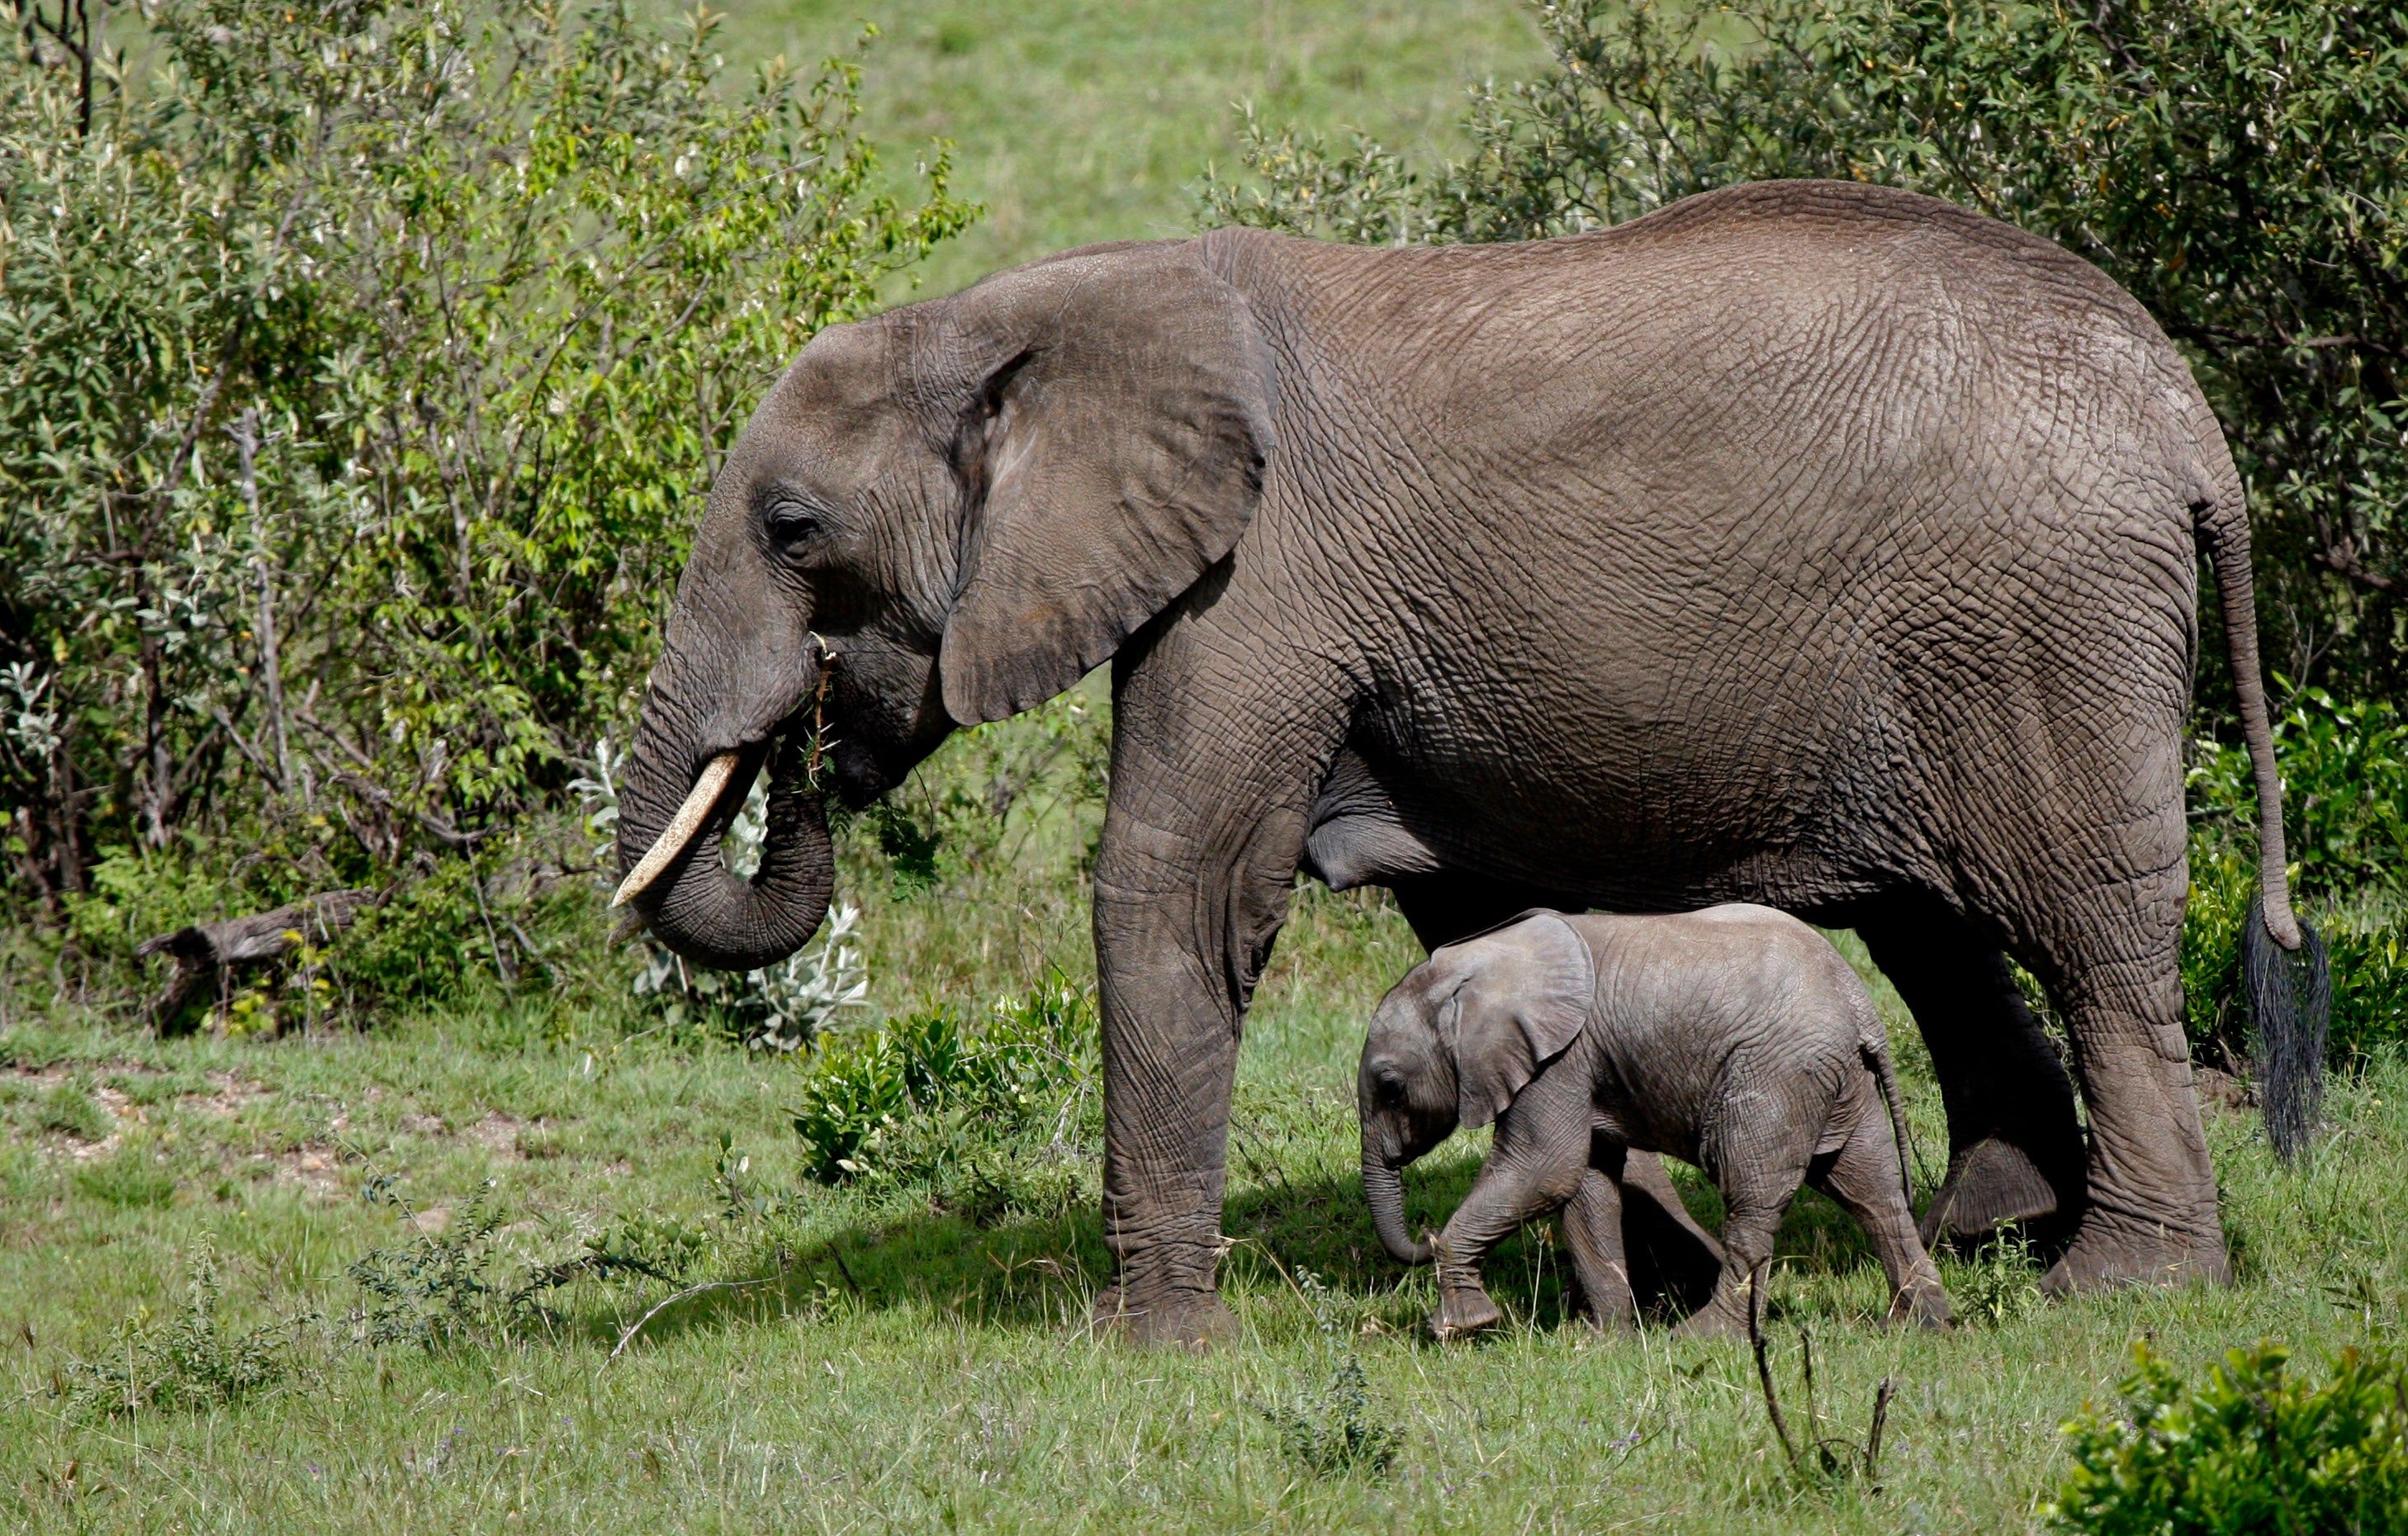 Elephants have been removed from their mothers in the wild